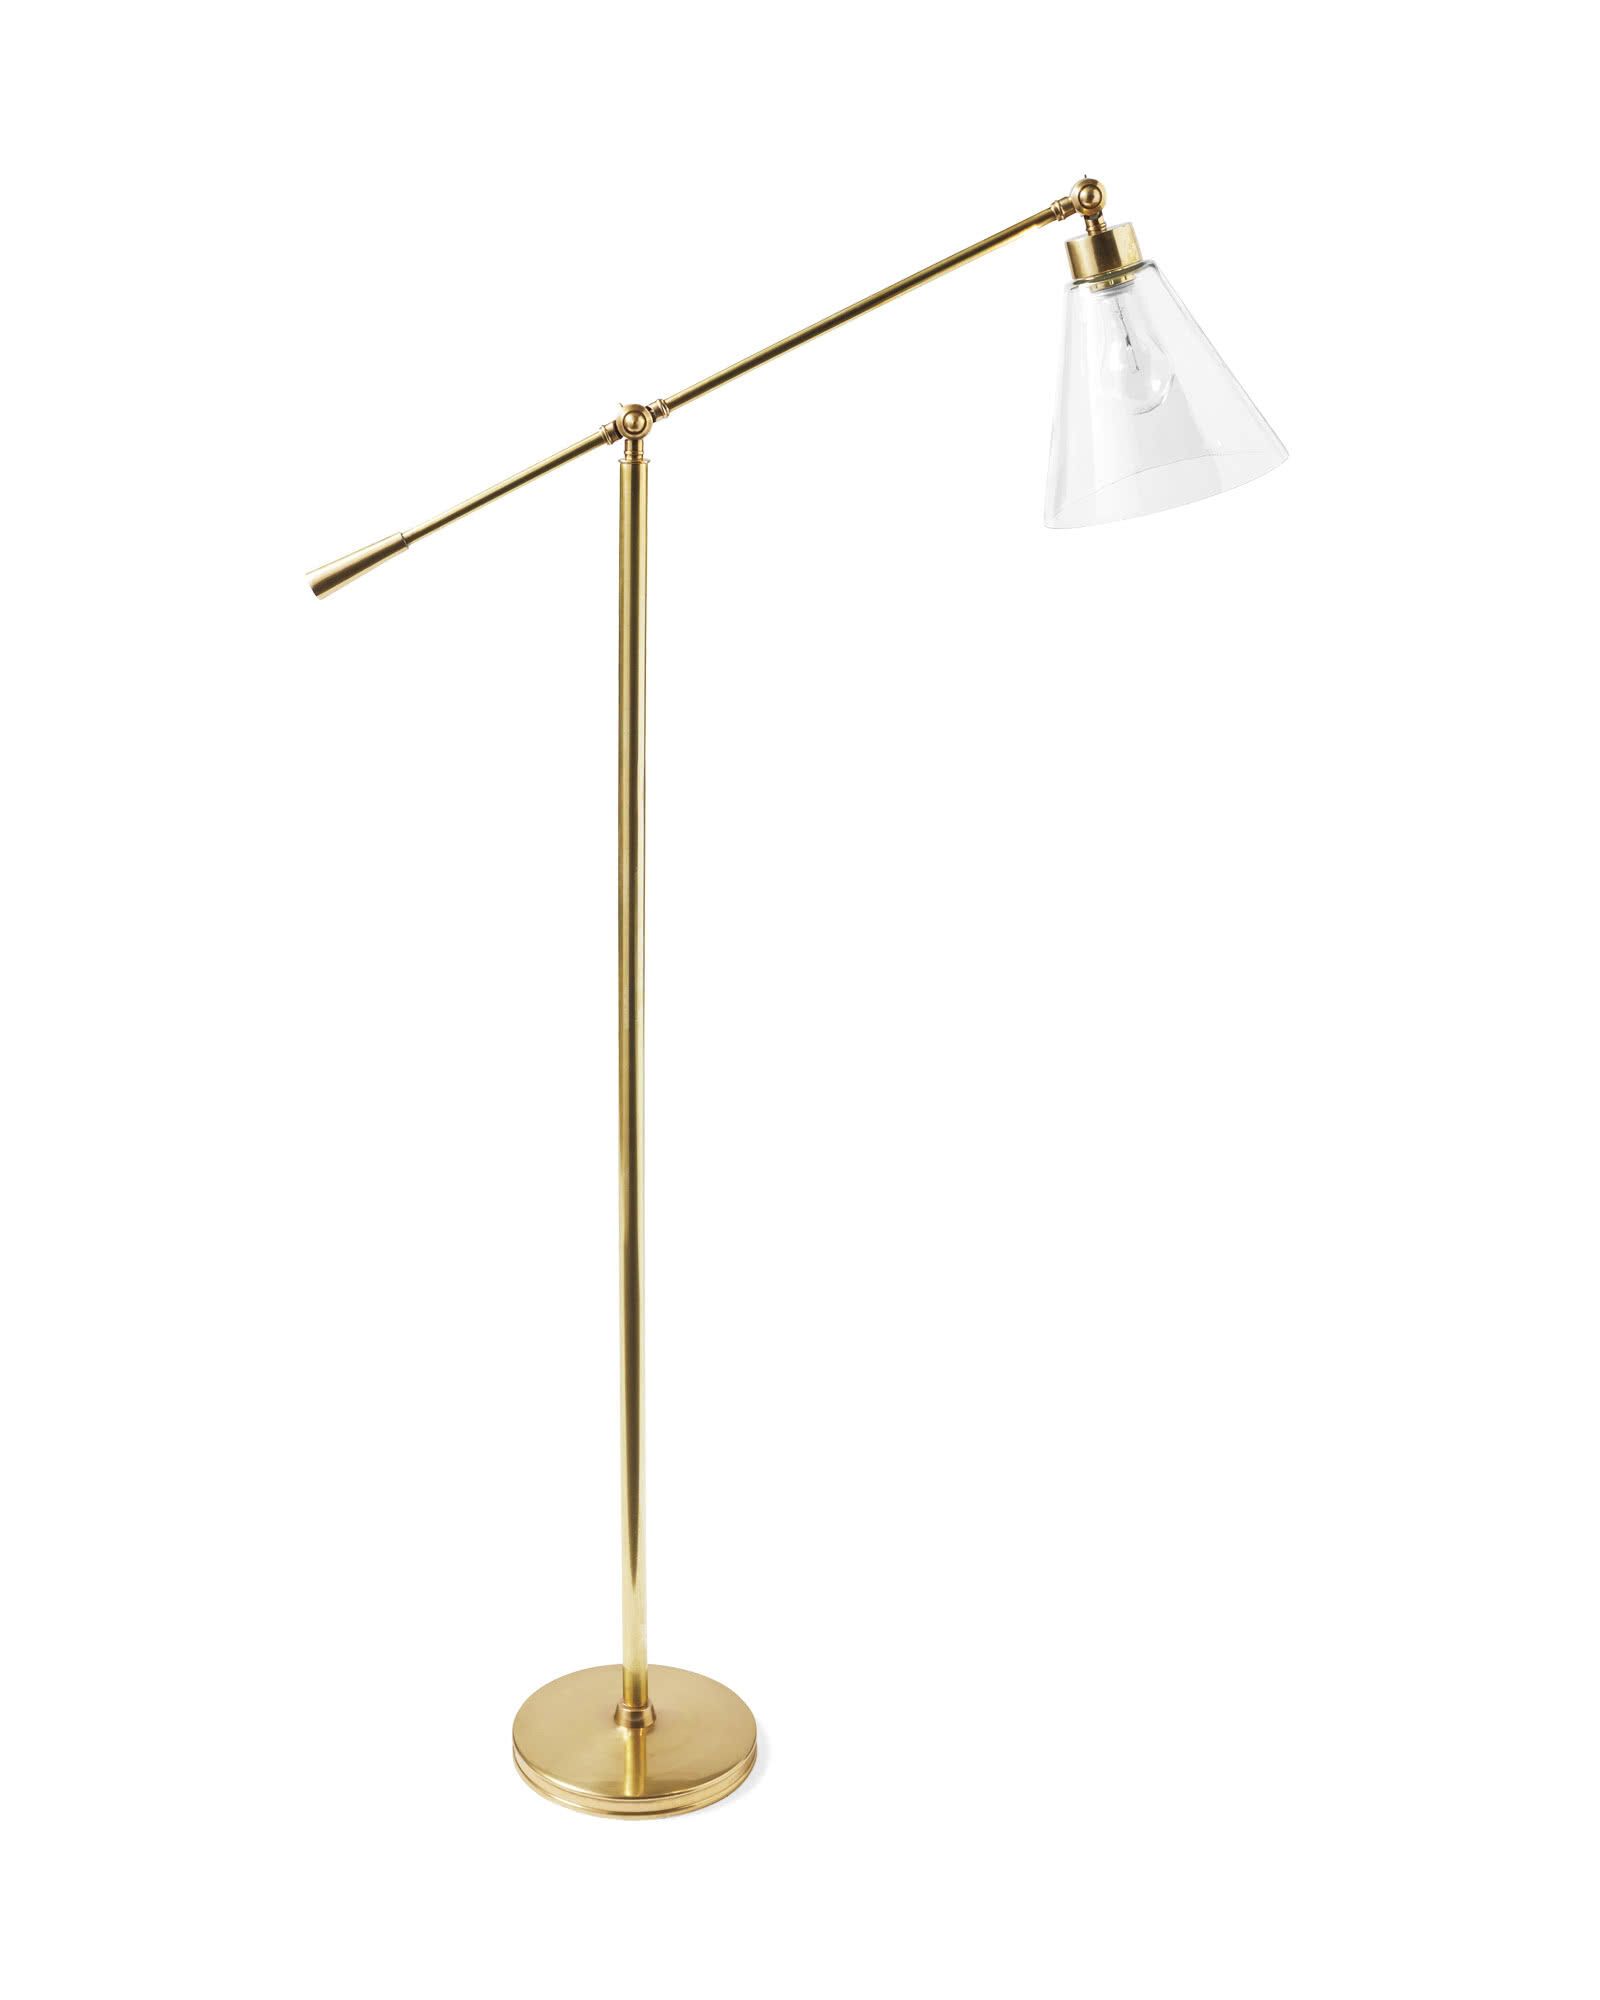 Claremont Floor Lamp | Serena and Lily